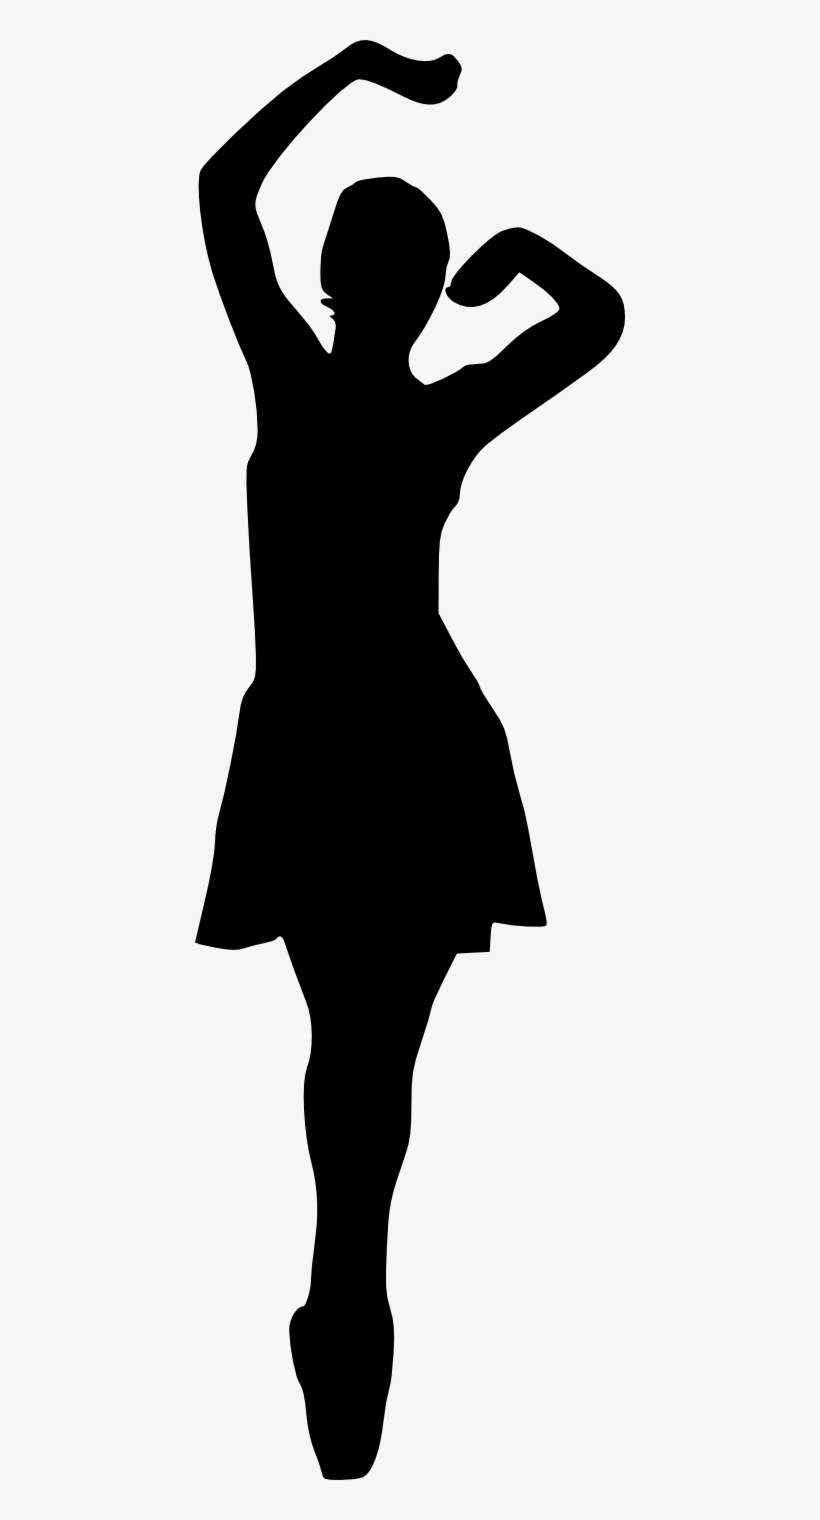 20 Ballerina Silhouette - Portable Network Graphics, transparent png #1765815